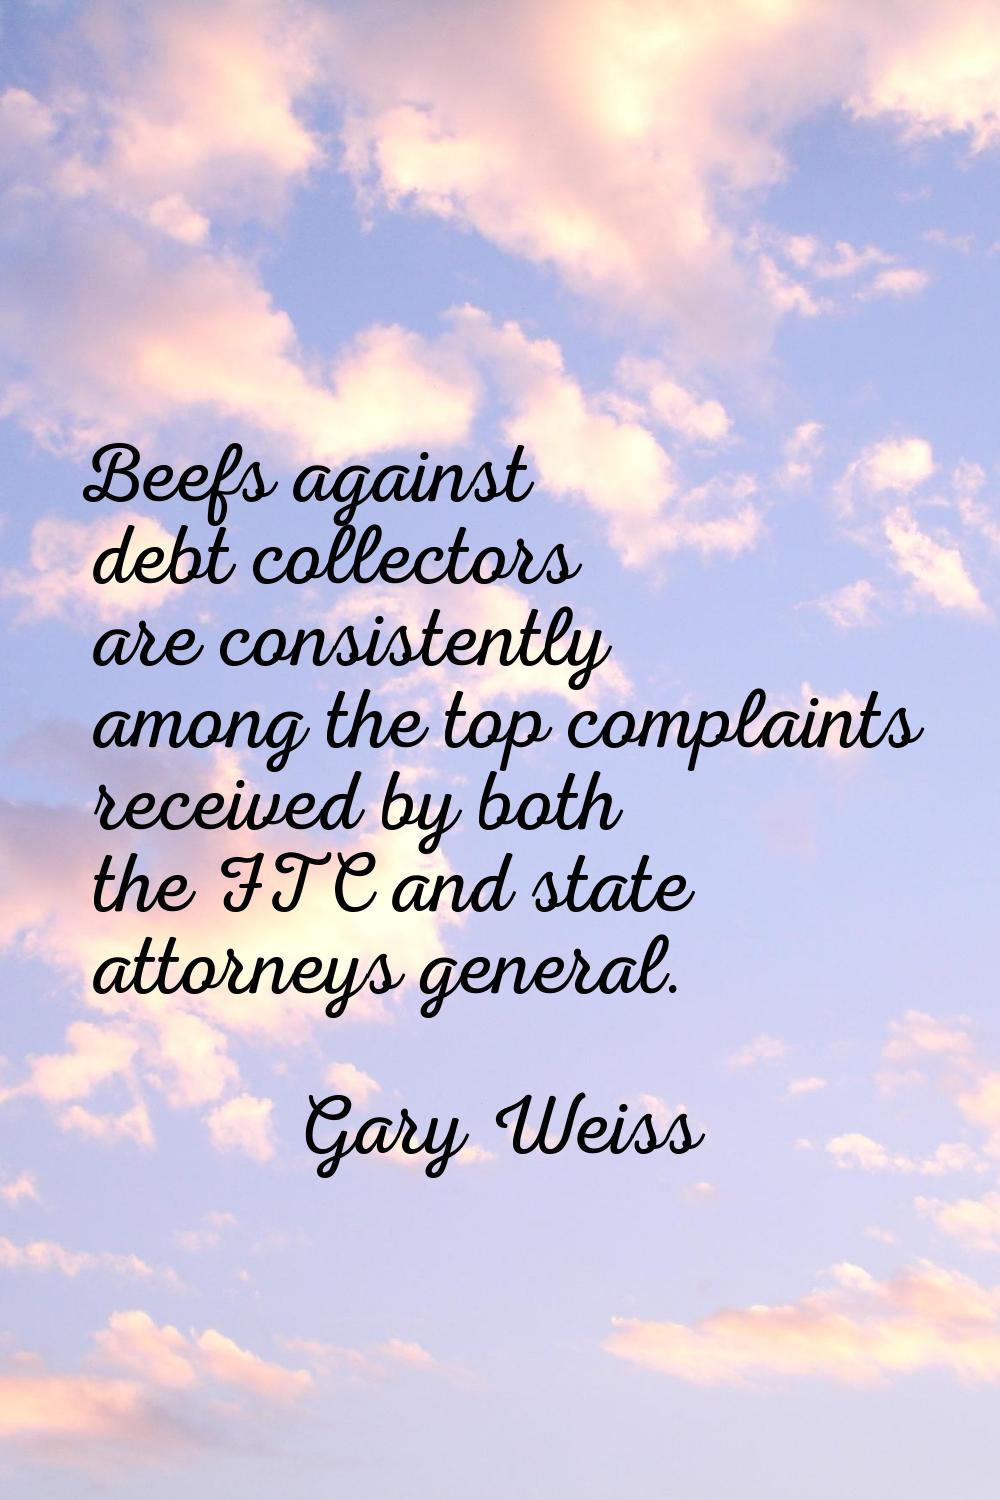 Beefs against debt collectors are consistently among the top complaints received by both the FTC an